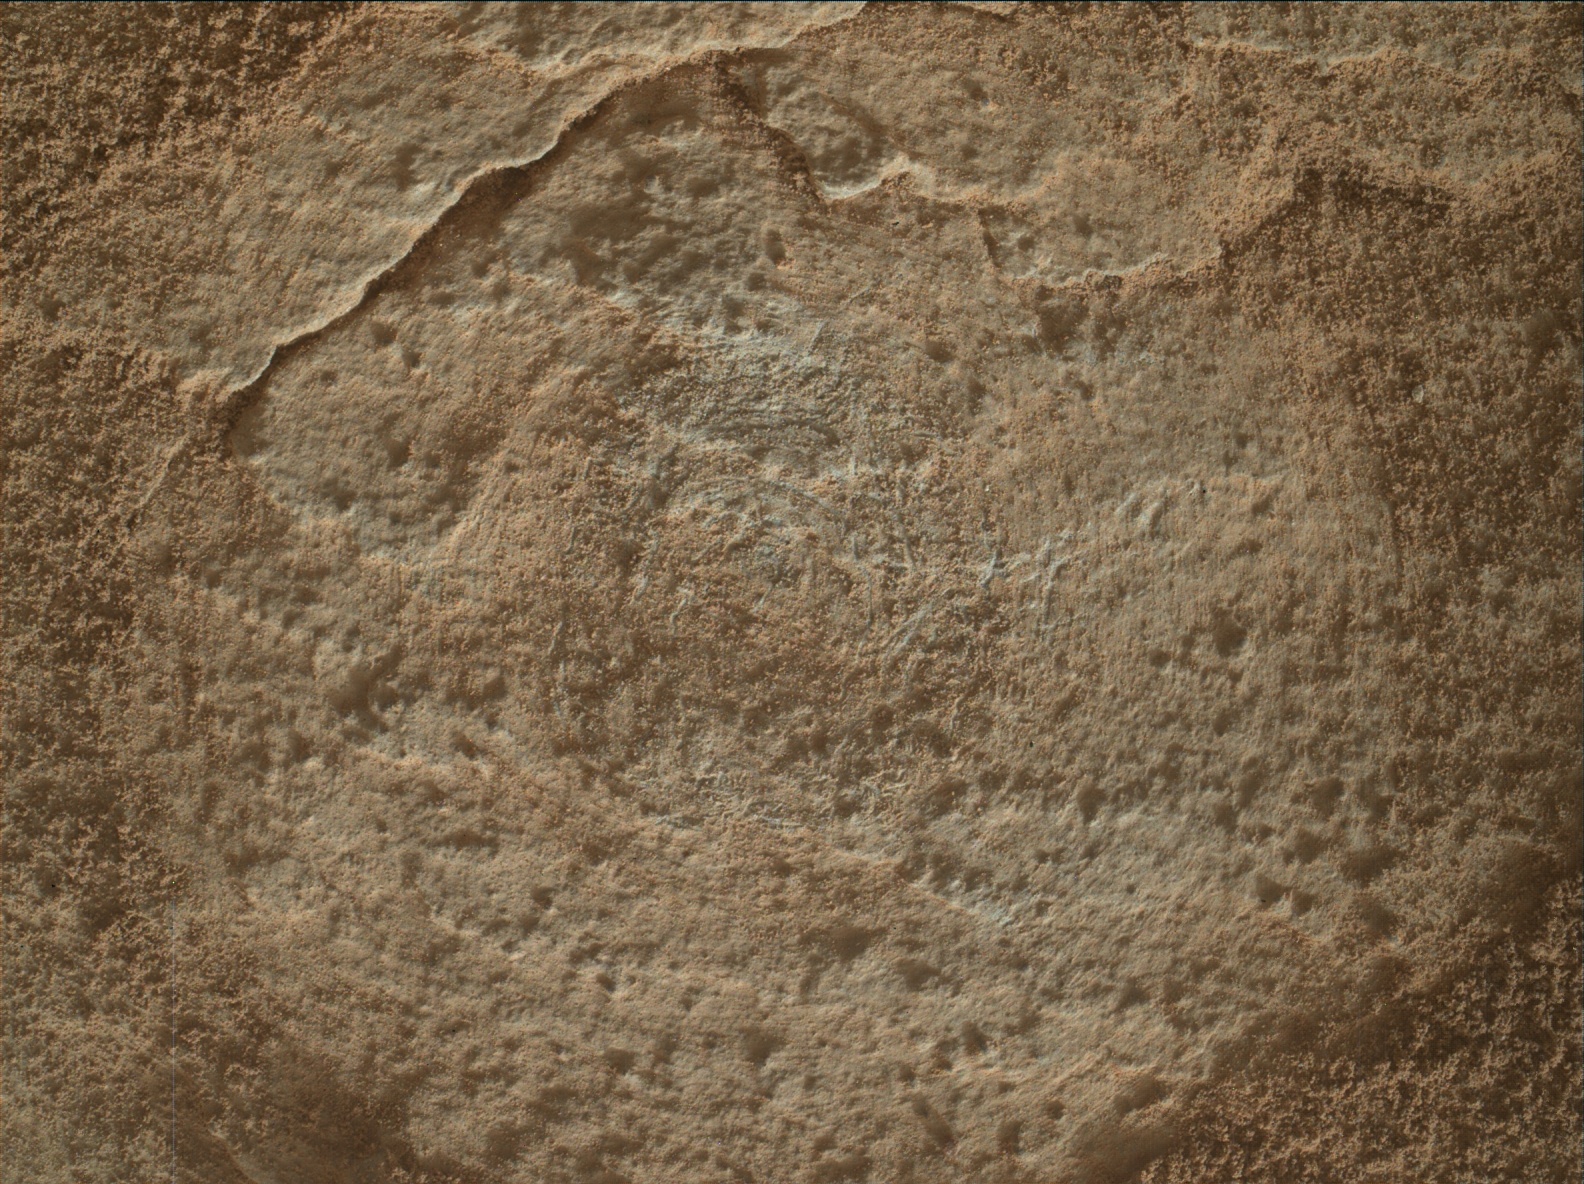 Nasa's Mars rover Curiosity acquired this image using its Mars Hand Lens Imager (MAHLI) on Sol 3397